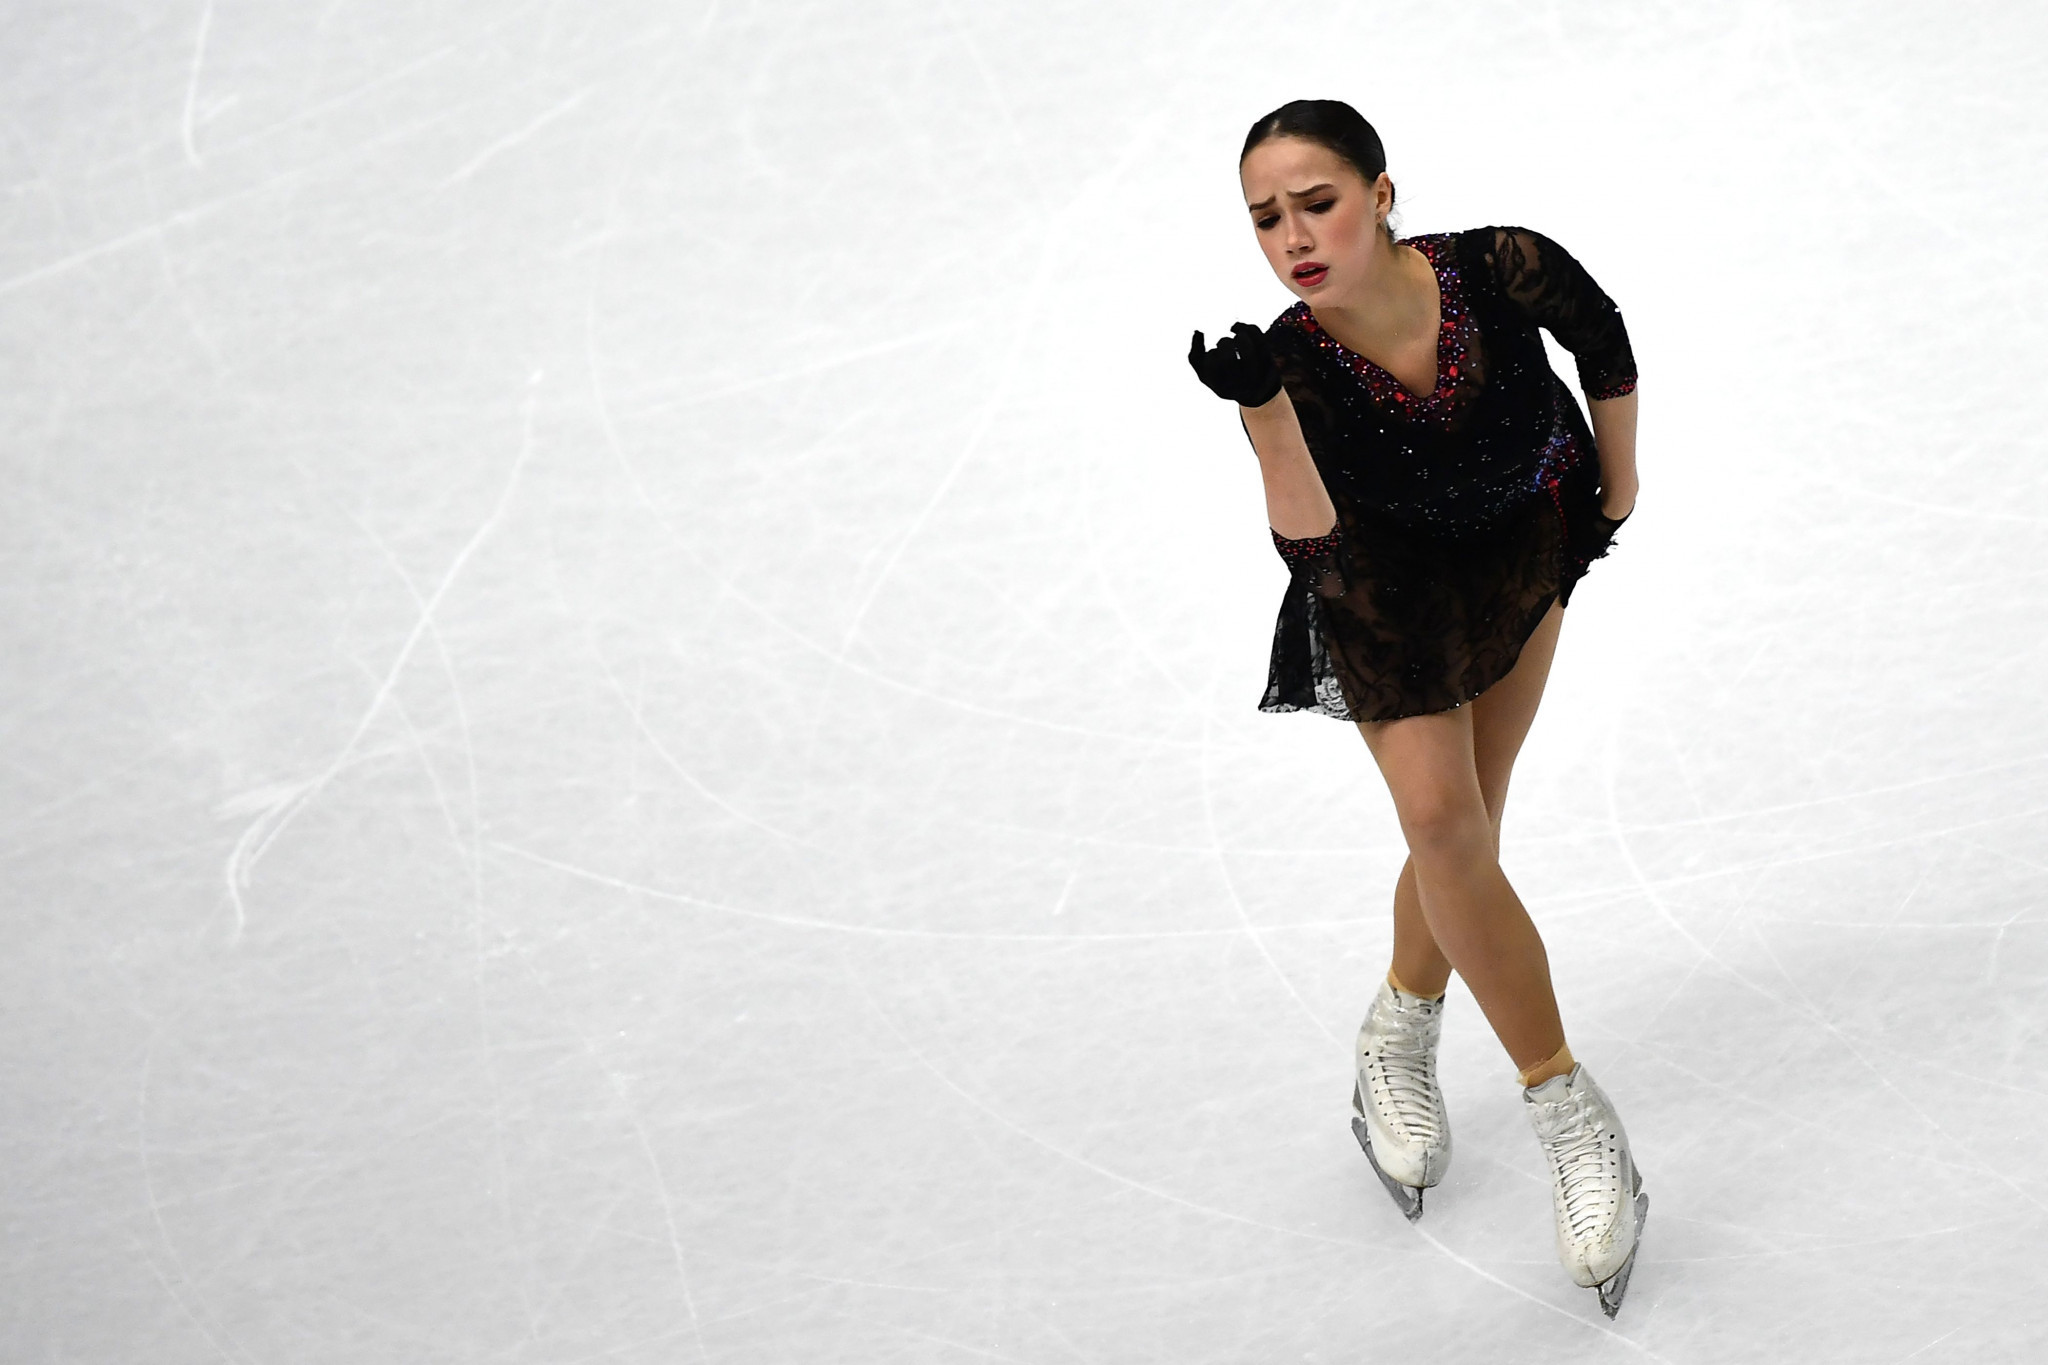 Alina Zagitova rejected rumours that she was retiring from figure skating ©Getty Images